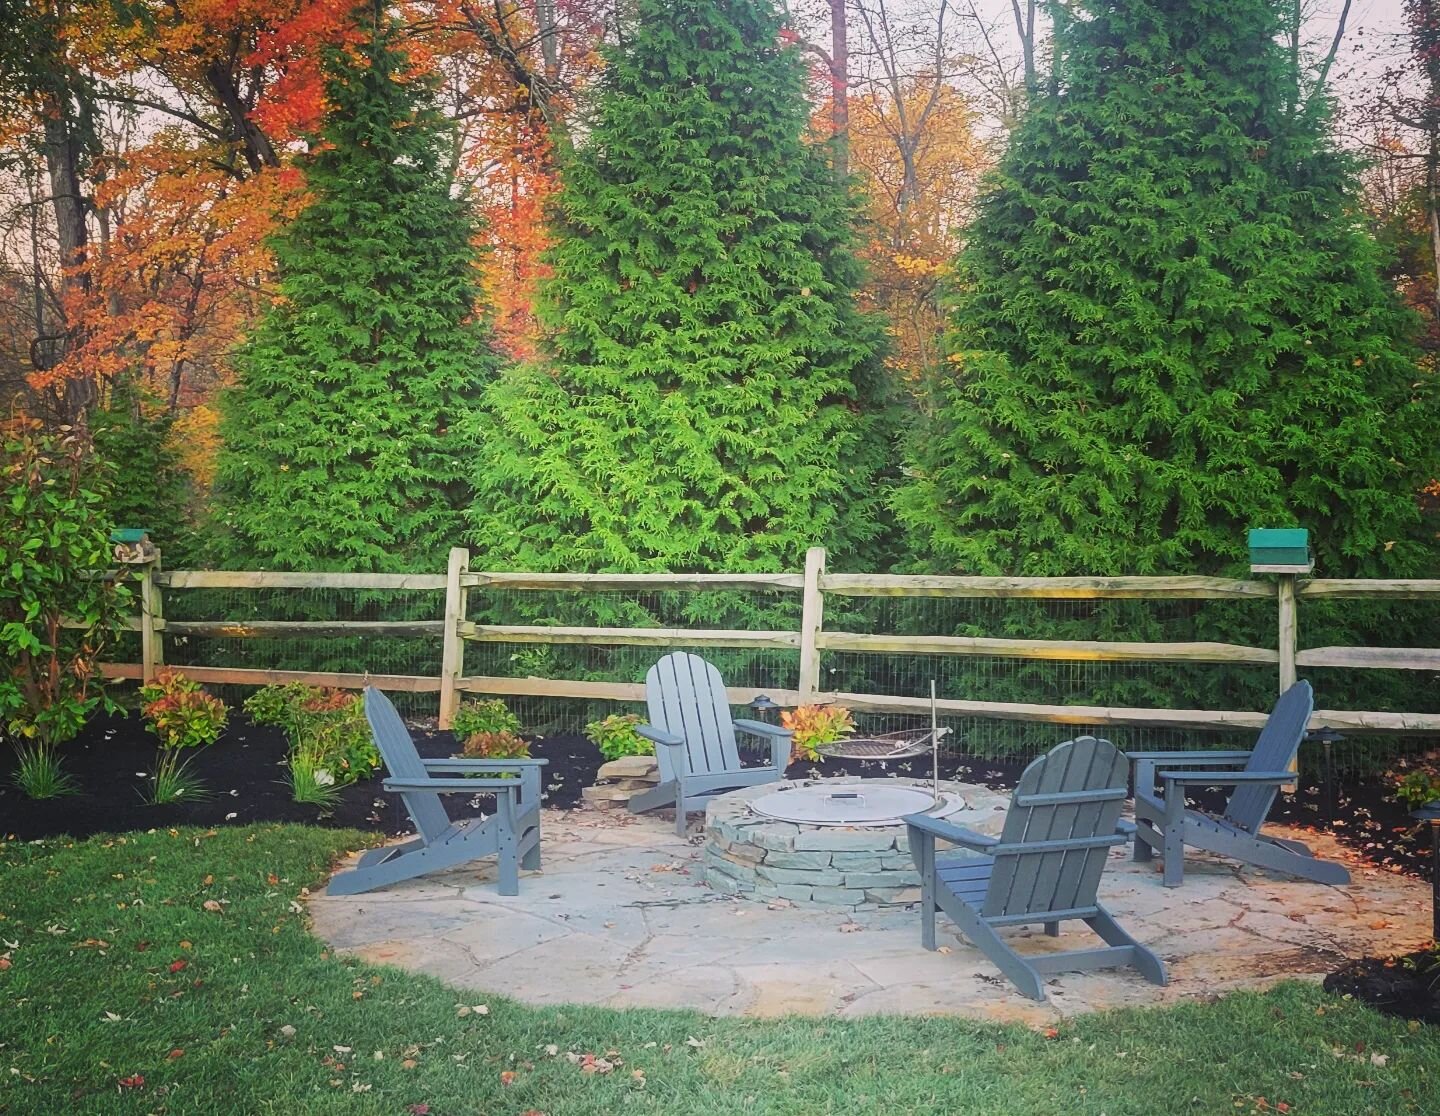 Our latest firepit was completed just in time for peak foliage. Inspired by the Adirondacks, we used irregular Bluestone for the patio and a natural bluestone for the firepit enclosure. In the firepit enclosure is a @breeo smokeless firepit with the 